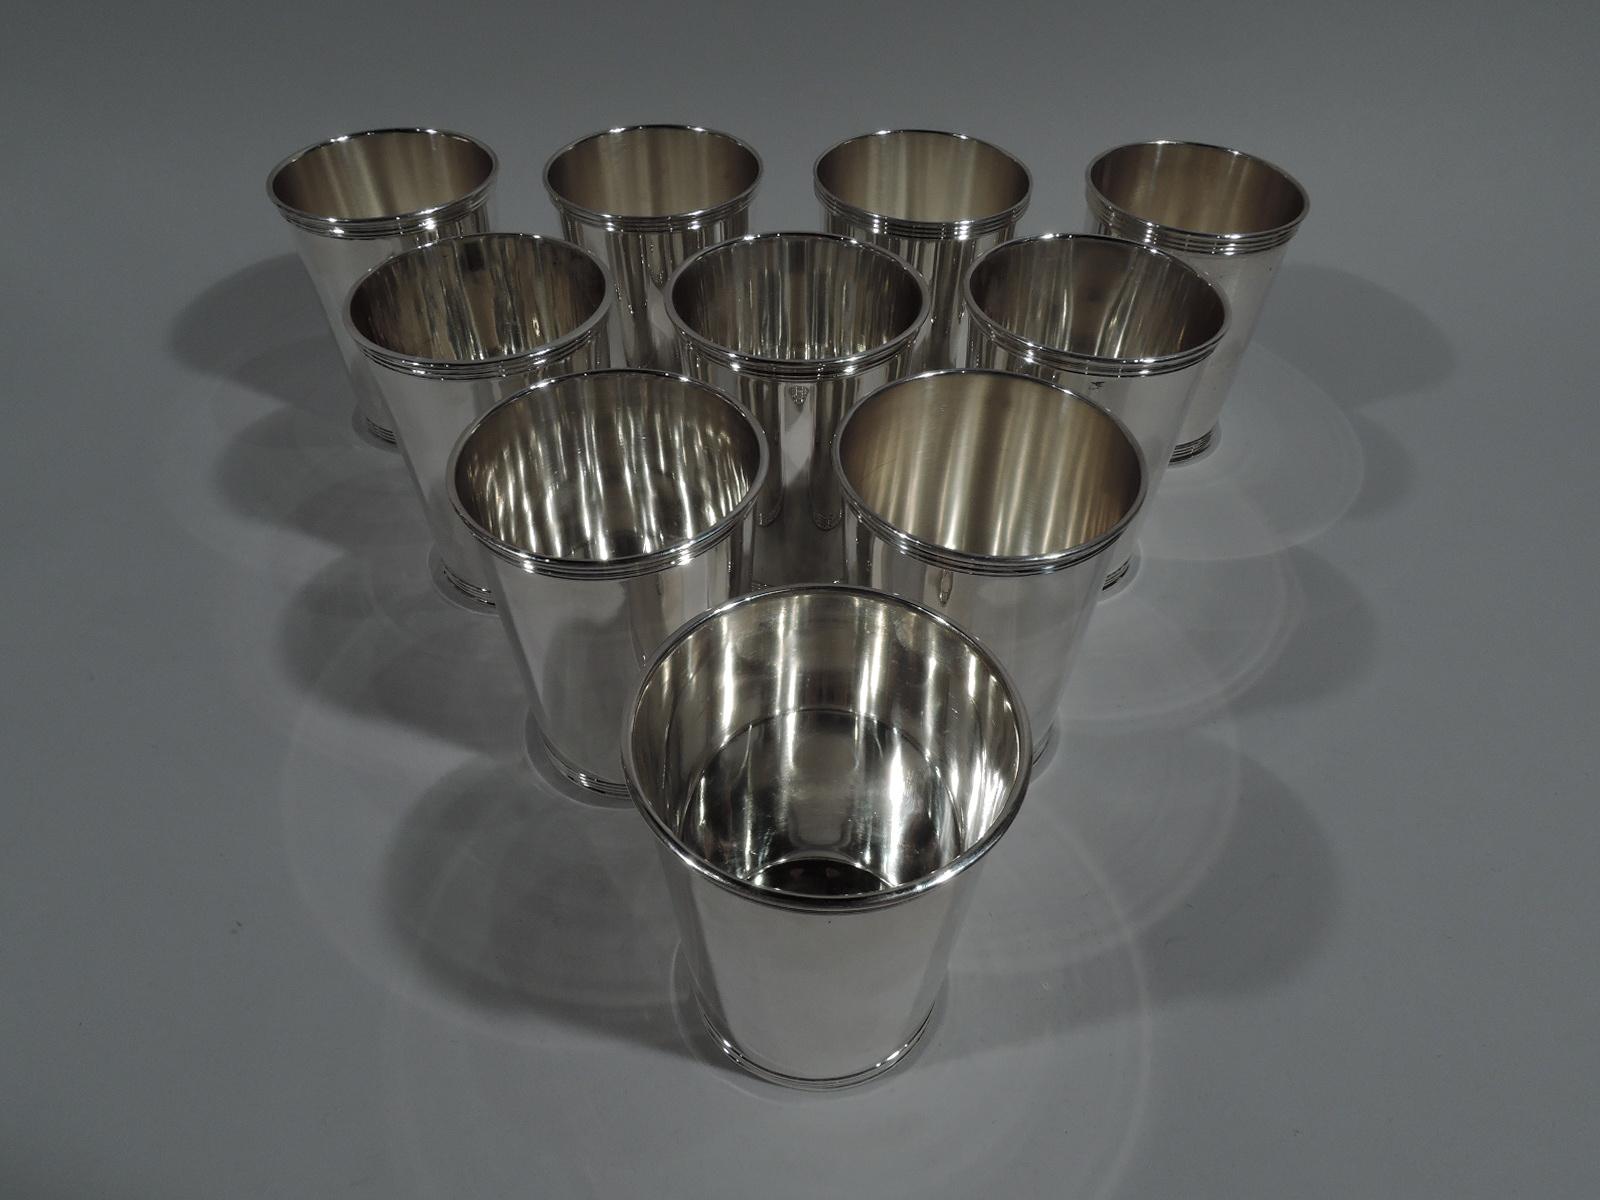 Set of 10 sterling silver mint julep cups. Made by Manchester Silver Co. in Providence. Each: Straight and tapering sides and reeded rim and foot. Fully marked including maker’s stamp. Eight numbered 3759 and 2 numbered 3759S. Total weight: 39.5